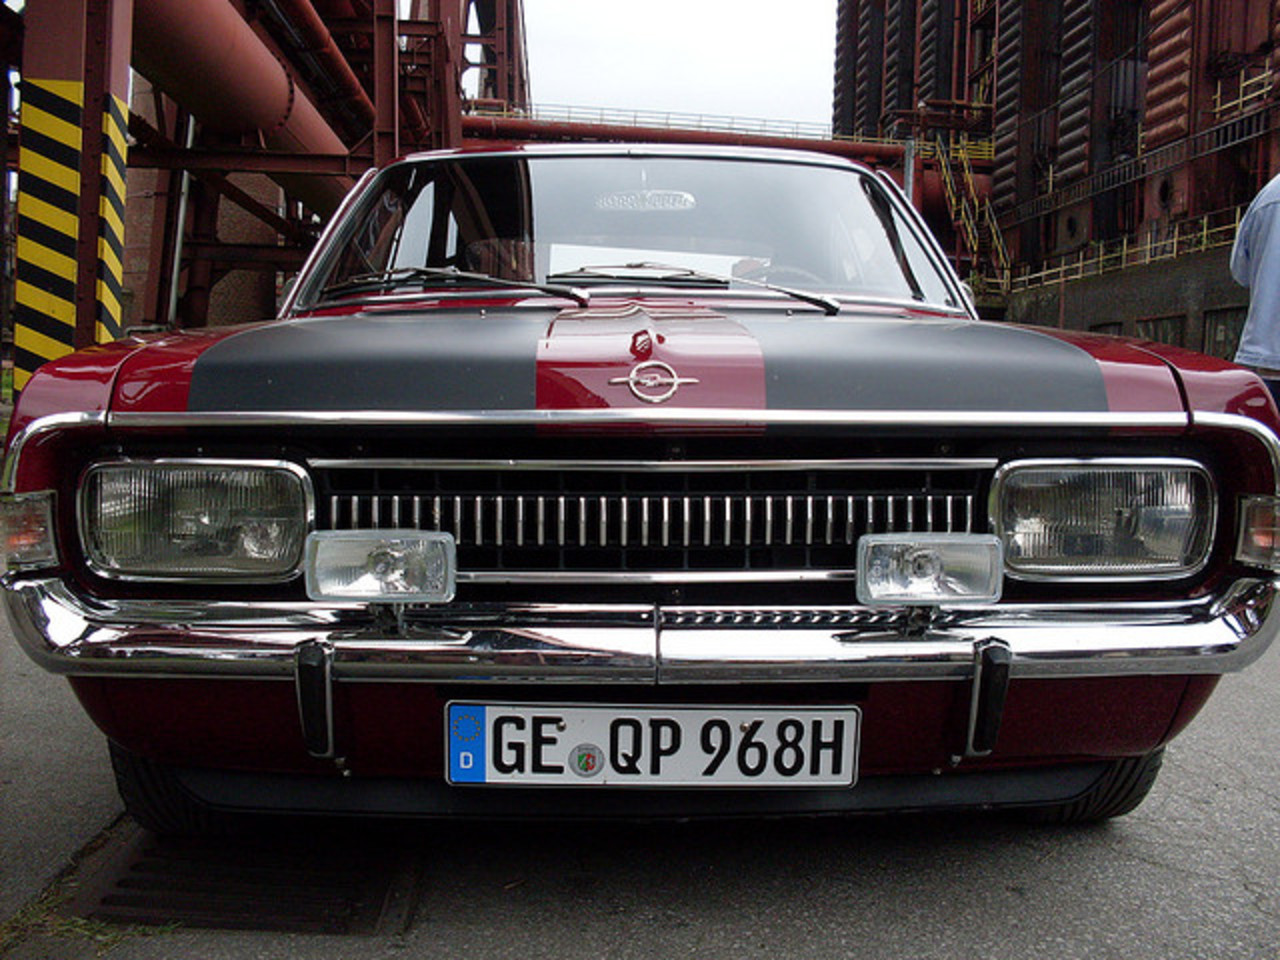 Opel Rekord 1700L Coupe | Flickr - Photo Sharing!